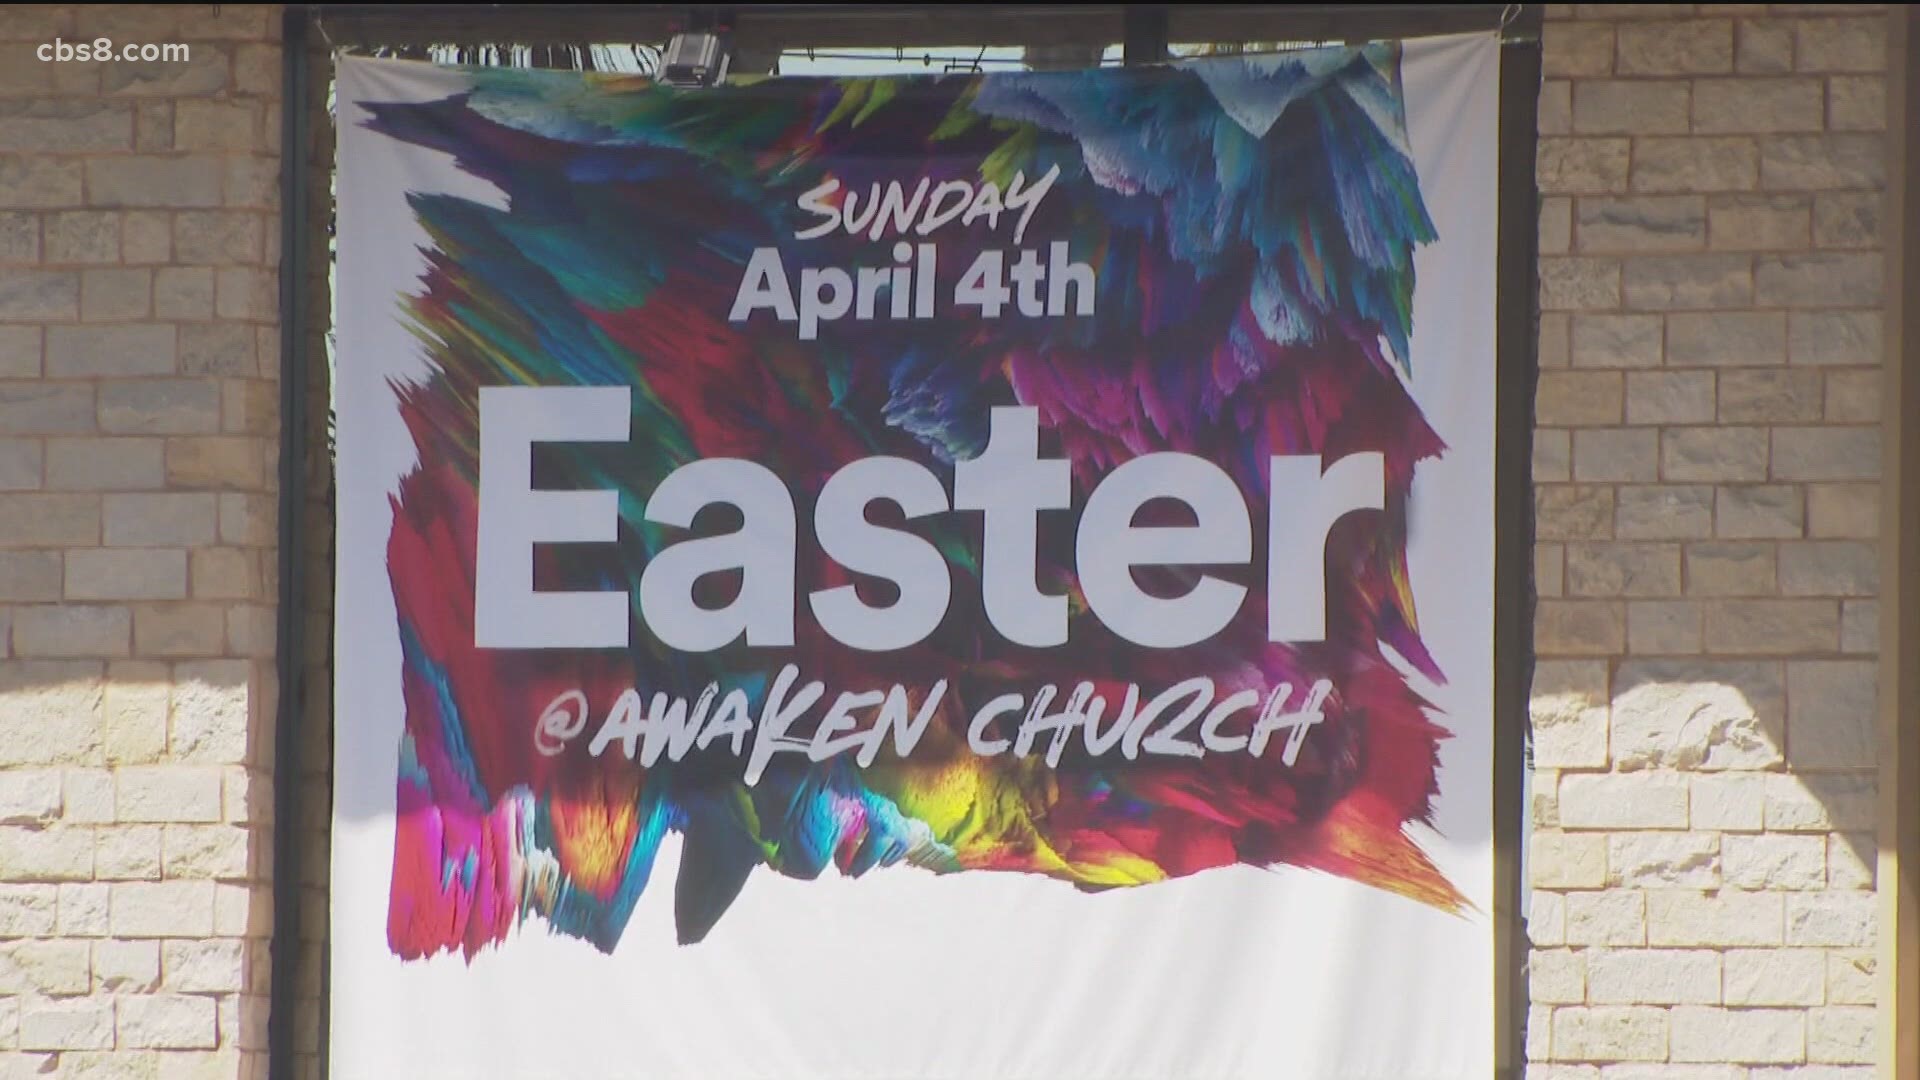 Easter Sunday was virtual-only last year for many churches, but with eased restrictions, more services are moving indoors.